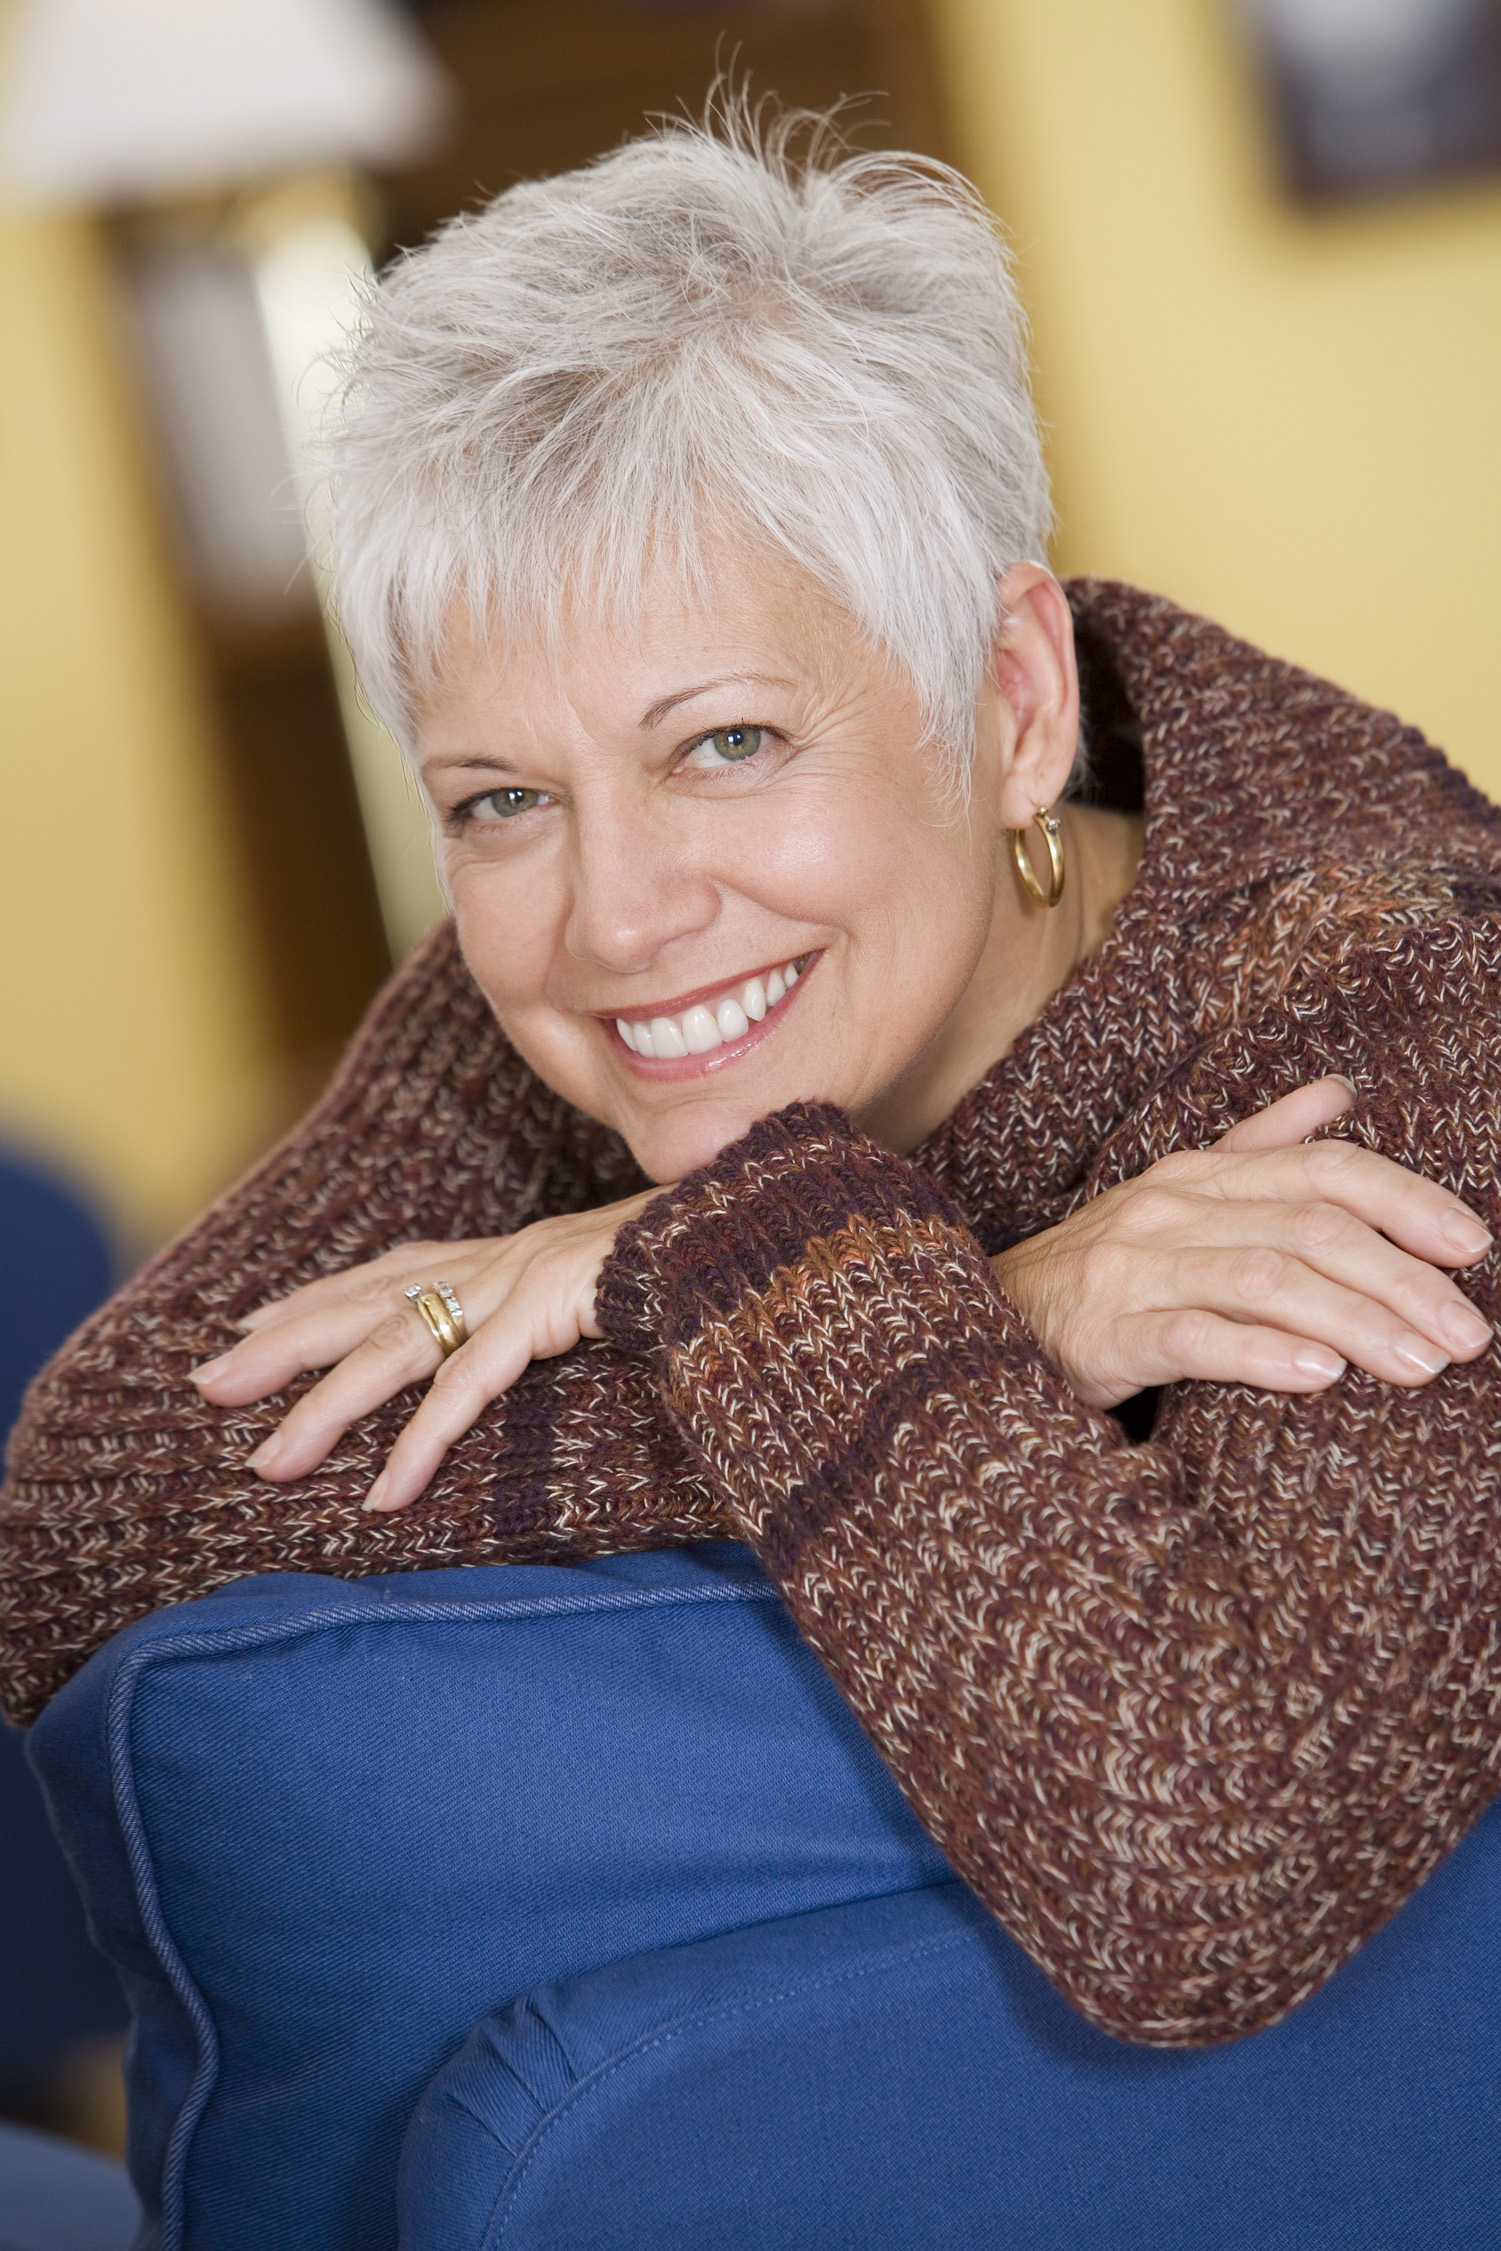 lady with short grey hair smiling